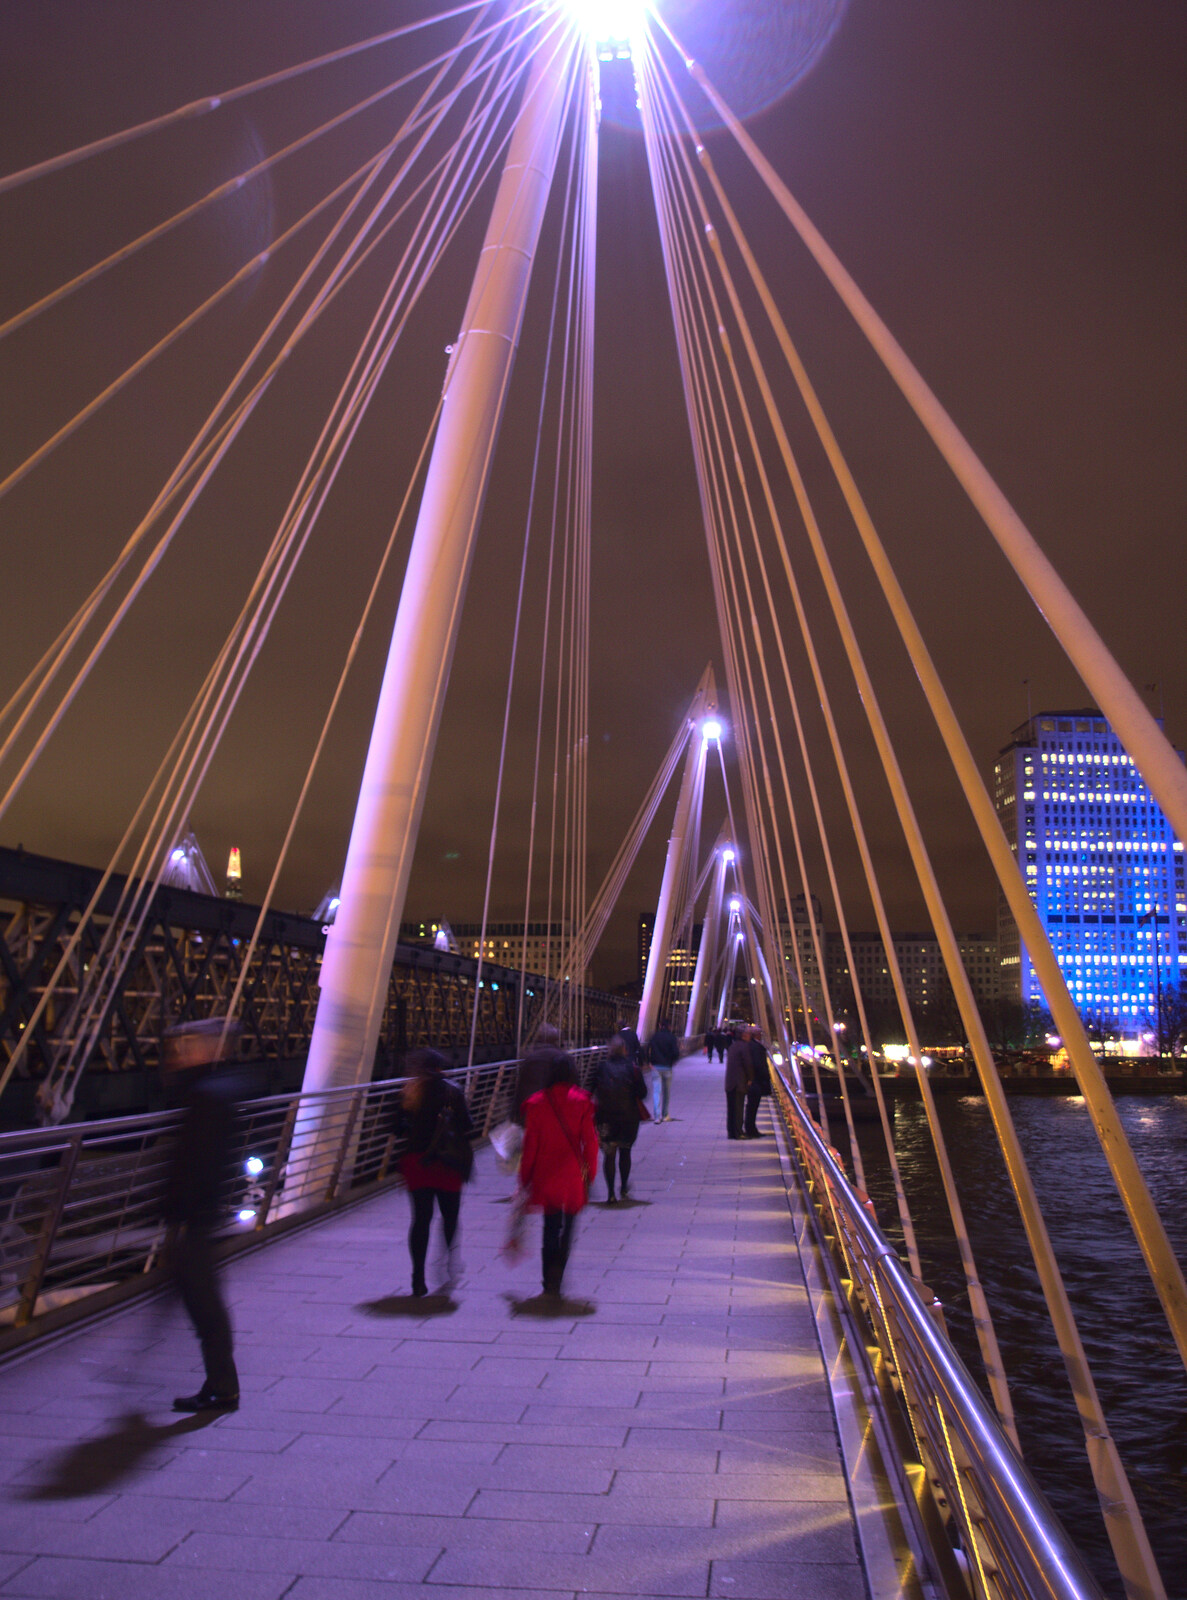 Footbridge over the Thames from SwiftKey Innovation Nights, Westminster, London - 19th December 2014